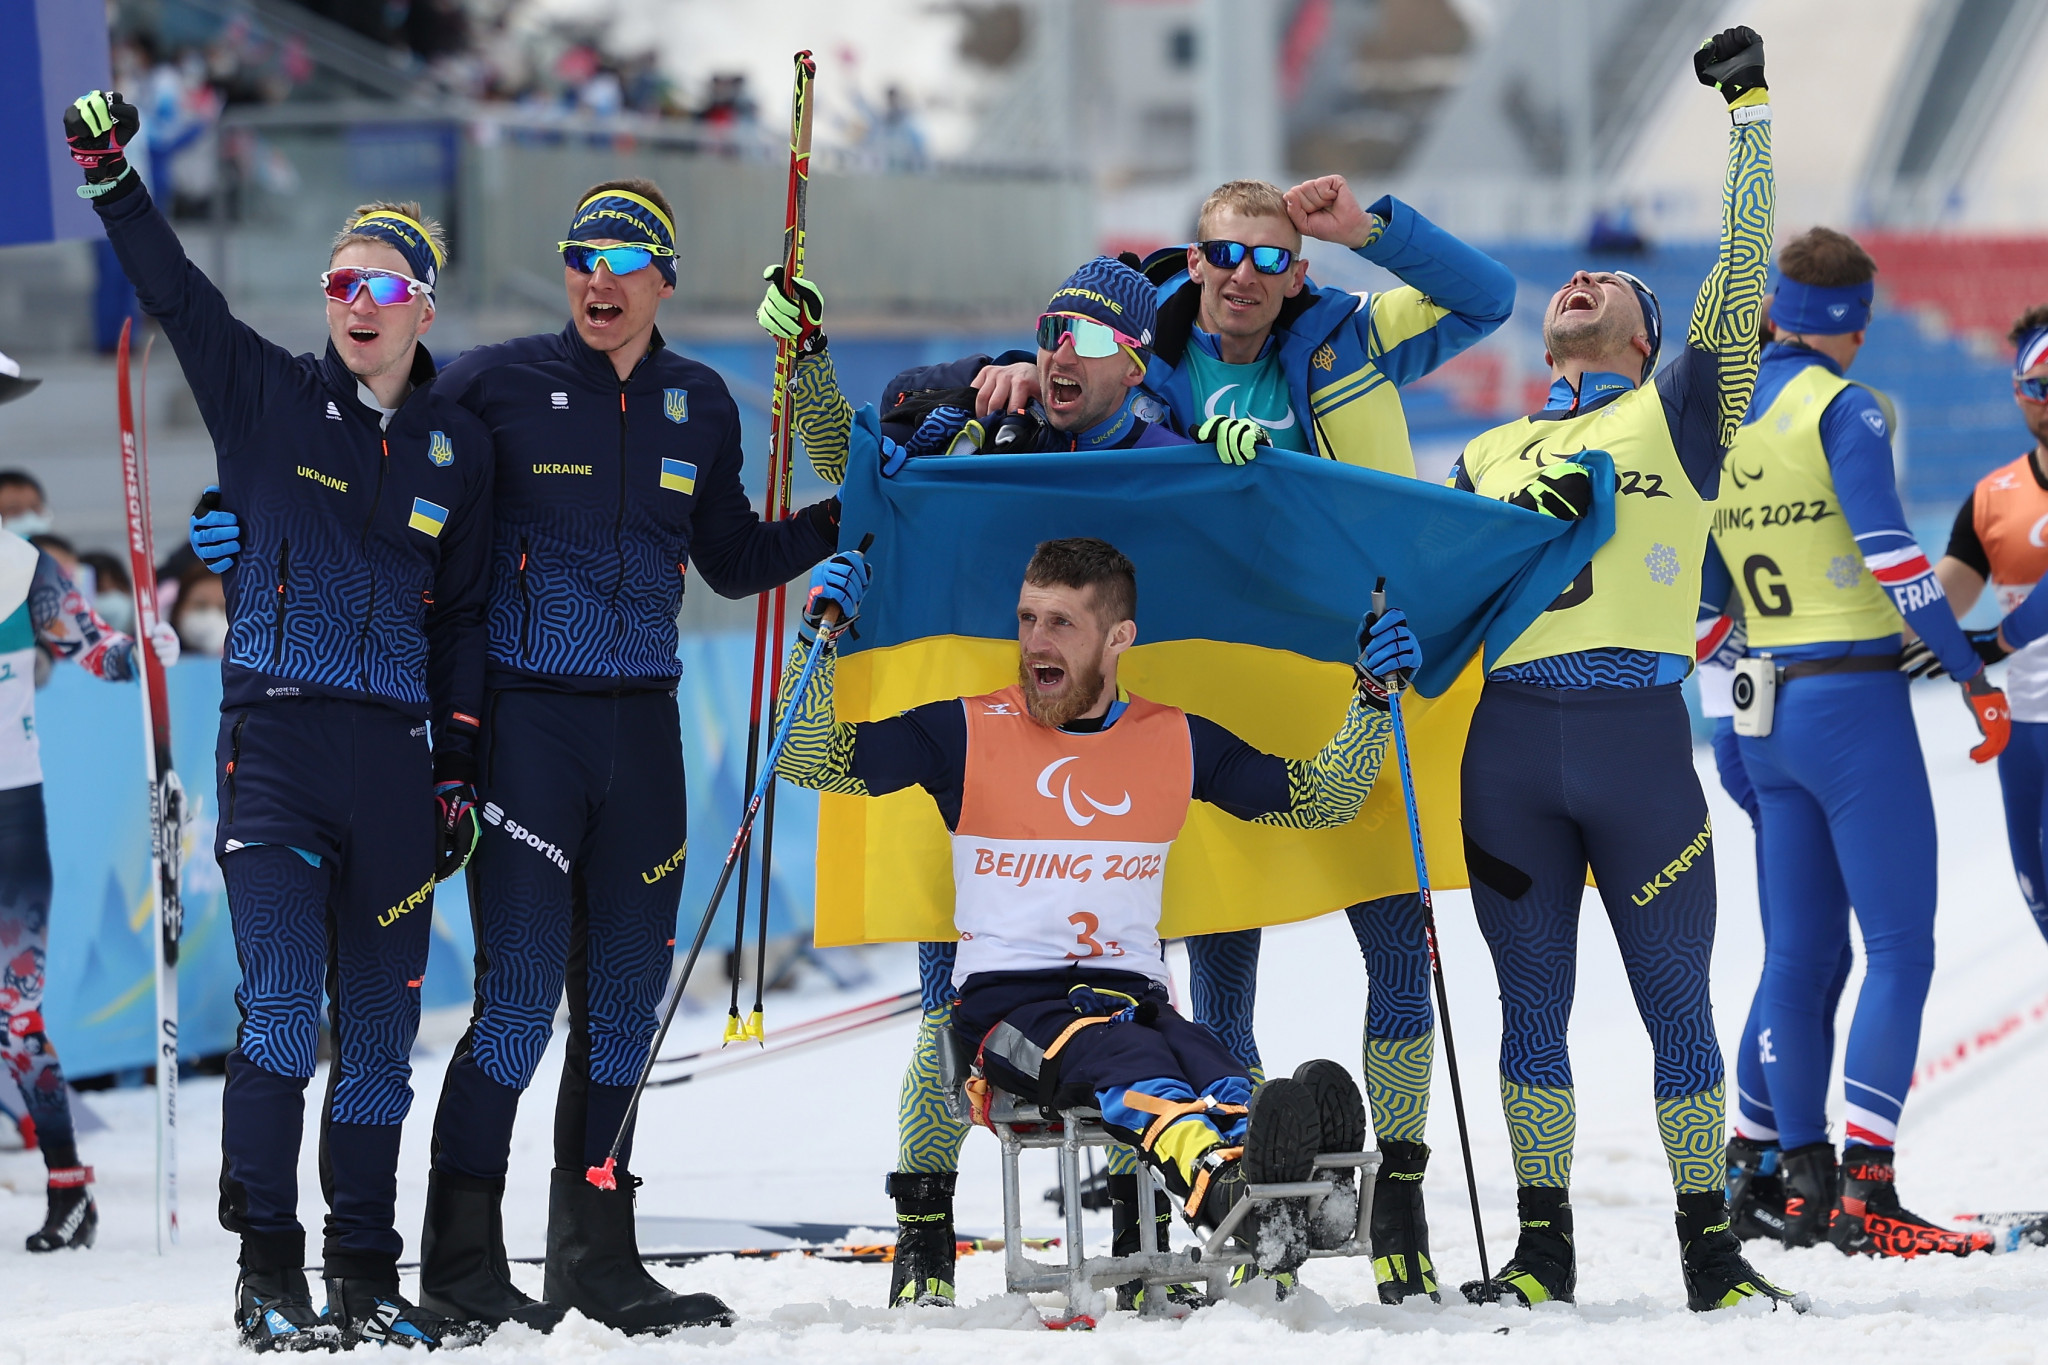 The invasion of Ukraine will have a negative effect on Paralympians, according to the NPC President ©Getty Images